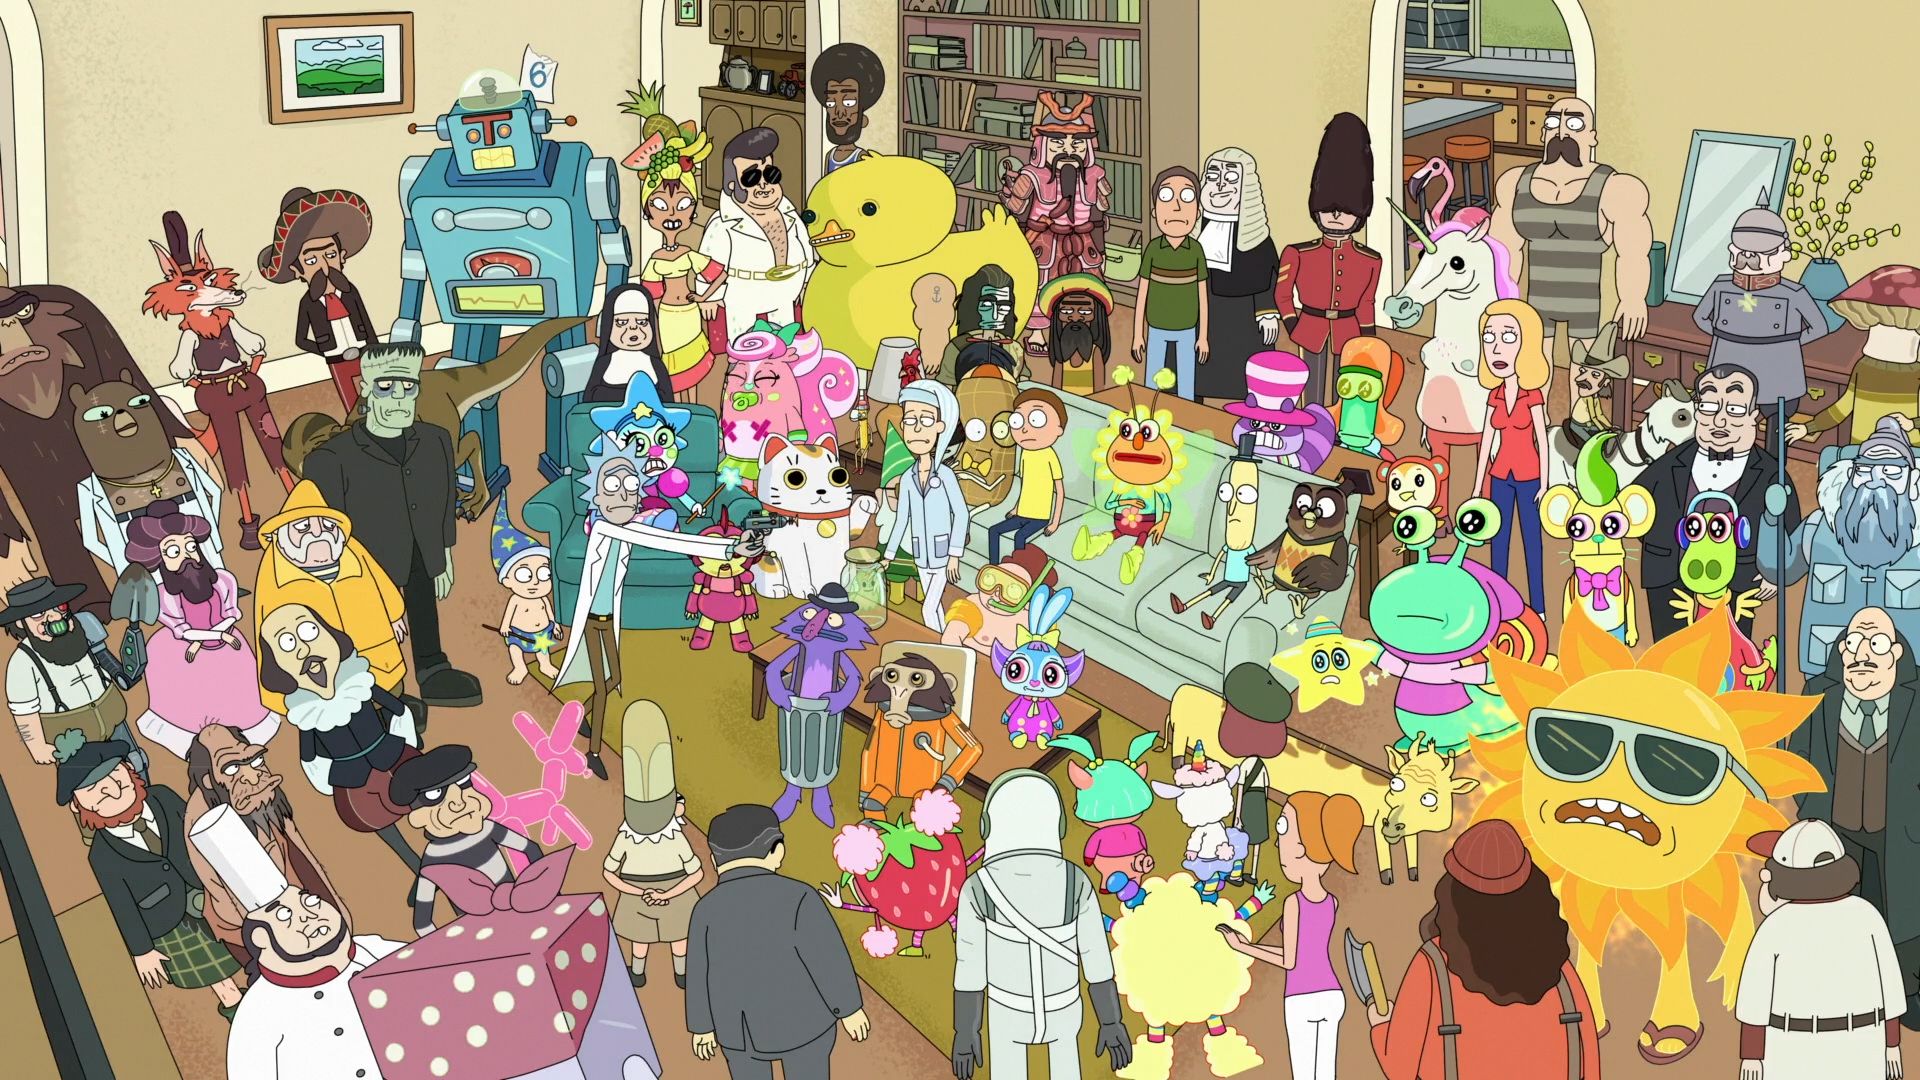 rick and morty, rick sanchez, tv show, amish cyborg (rick and morty), baby wizard (rick and morty), beth smith, cleopatra, frankenstein's monster (rick and morty), ghost in a jar (rick and morty), hamurai (rick and morty), jerry smith, morty smith, mr beauregard (rick and morty), mr poopybutthole (rick and morty), mrs refrigerator (rick and morty), pencilvester (rick and morty), photography raptor (rick and morty), reverse giraffe (rick and morty), sleepy gary (rick and morty), summer smith, tinkles (rick and morty), william shakespeare for android